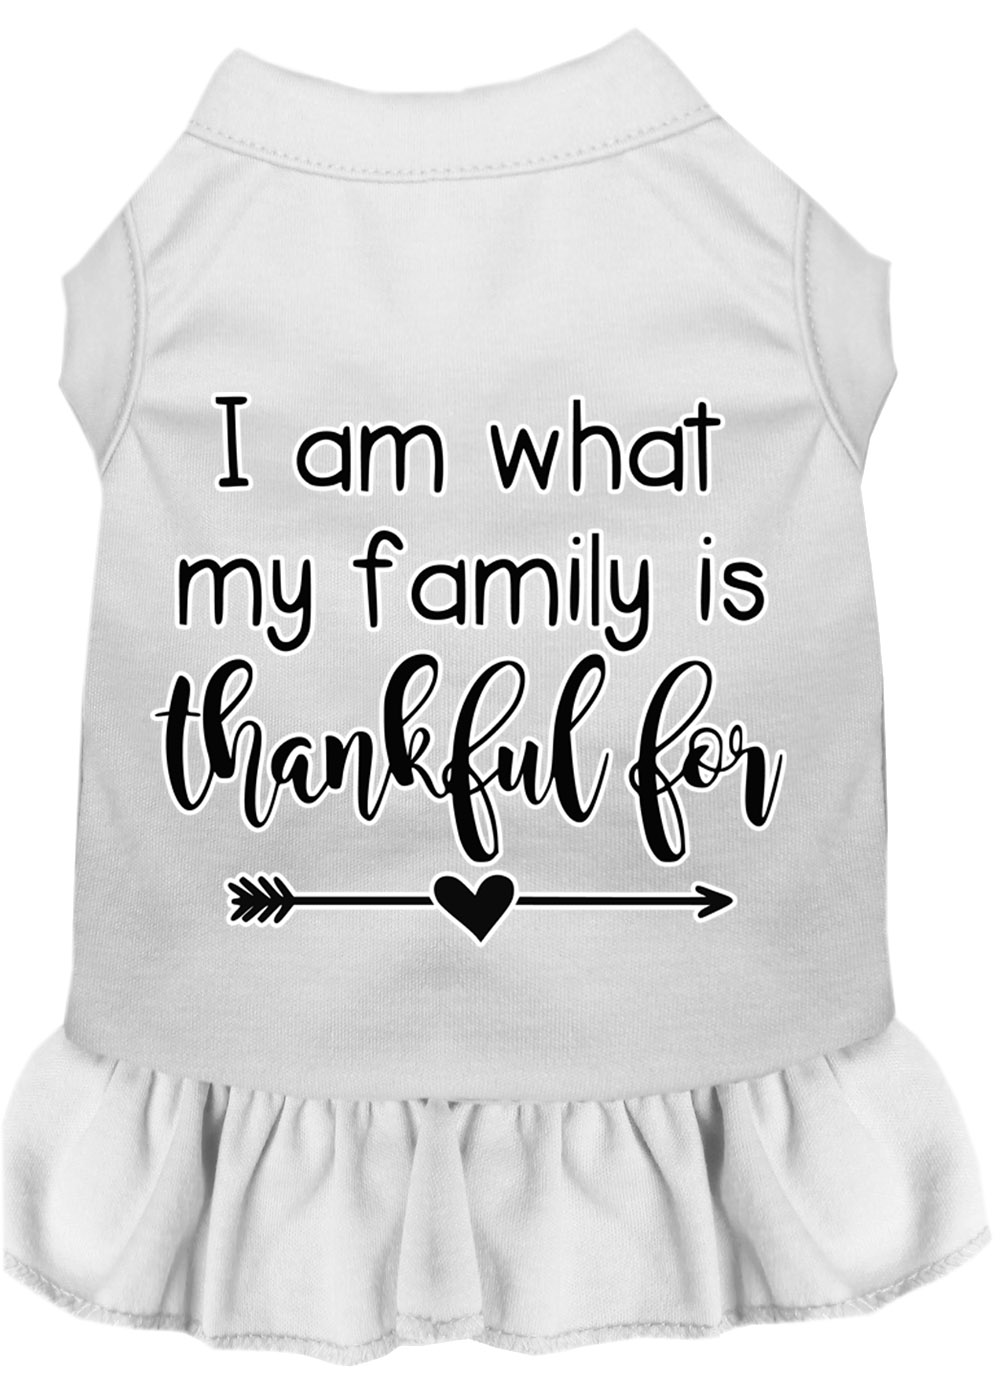 I Am What My Family is Thankful For Screen Print Dog Dress White 4X